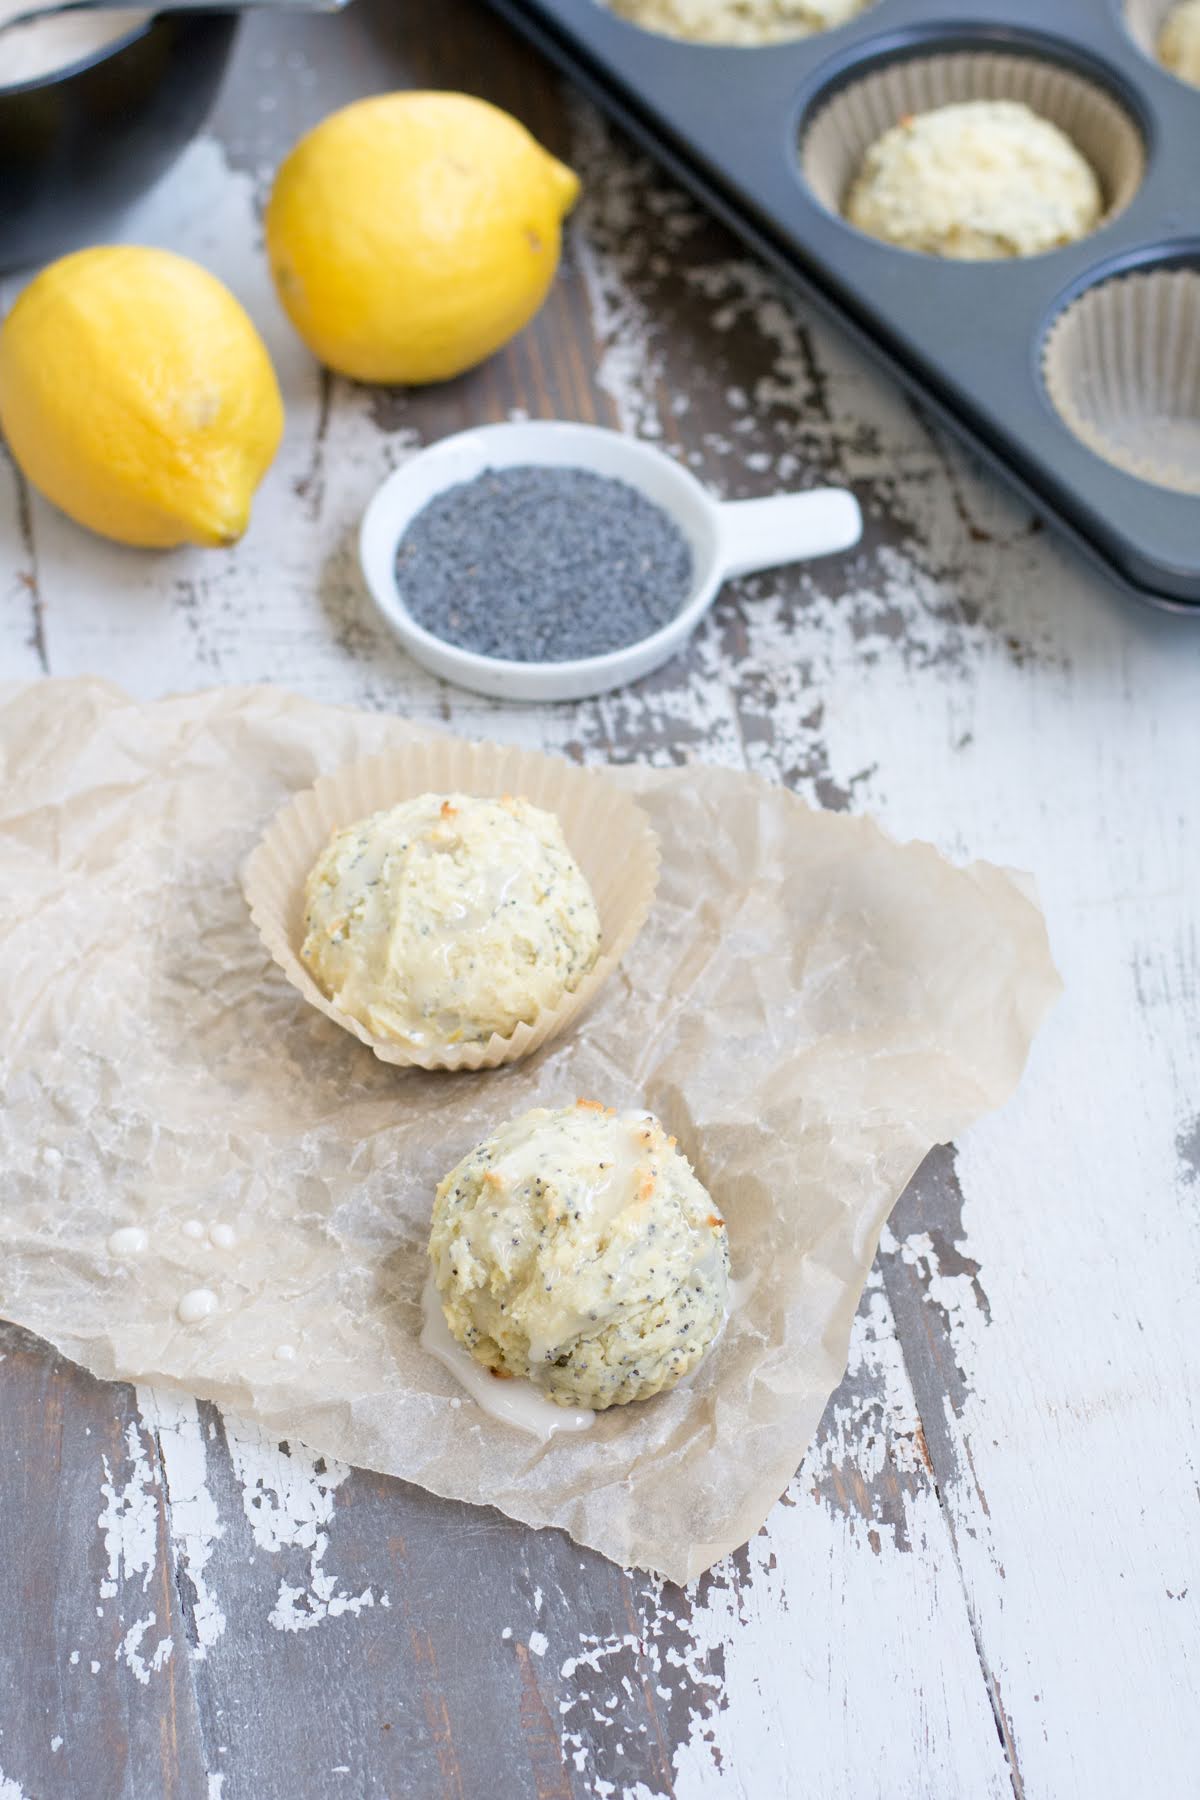 Two small muffins on a piece of parchment, next to a dish of poppy and two lemons.